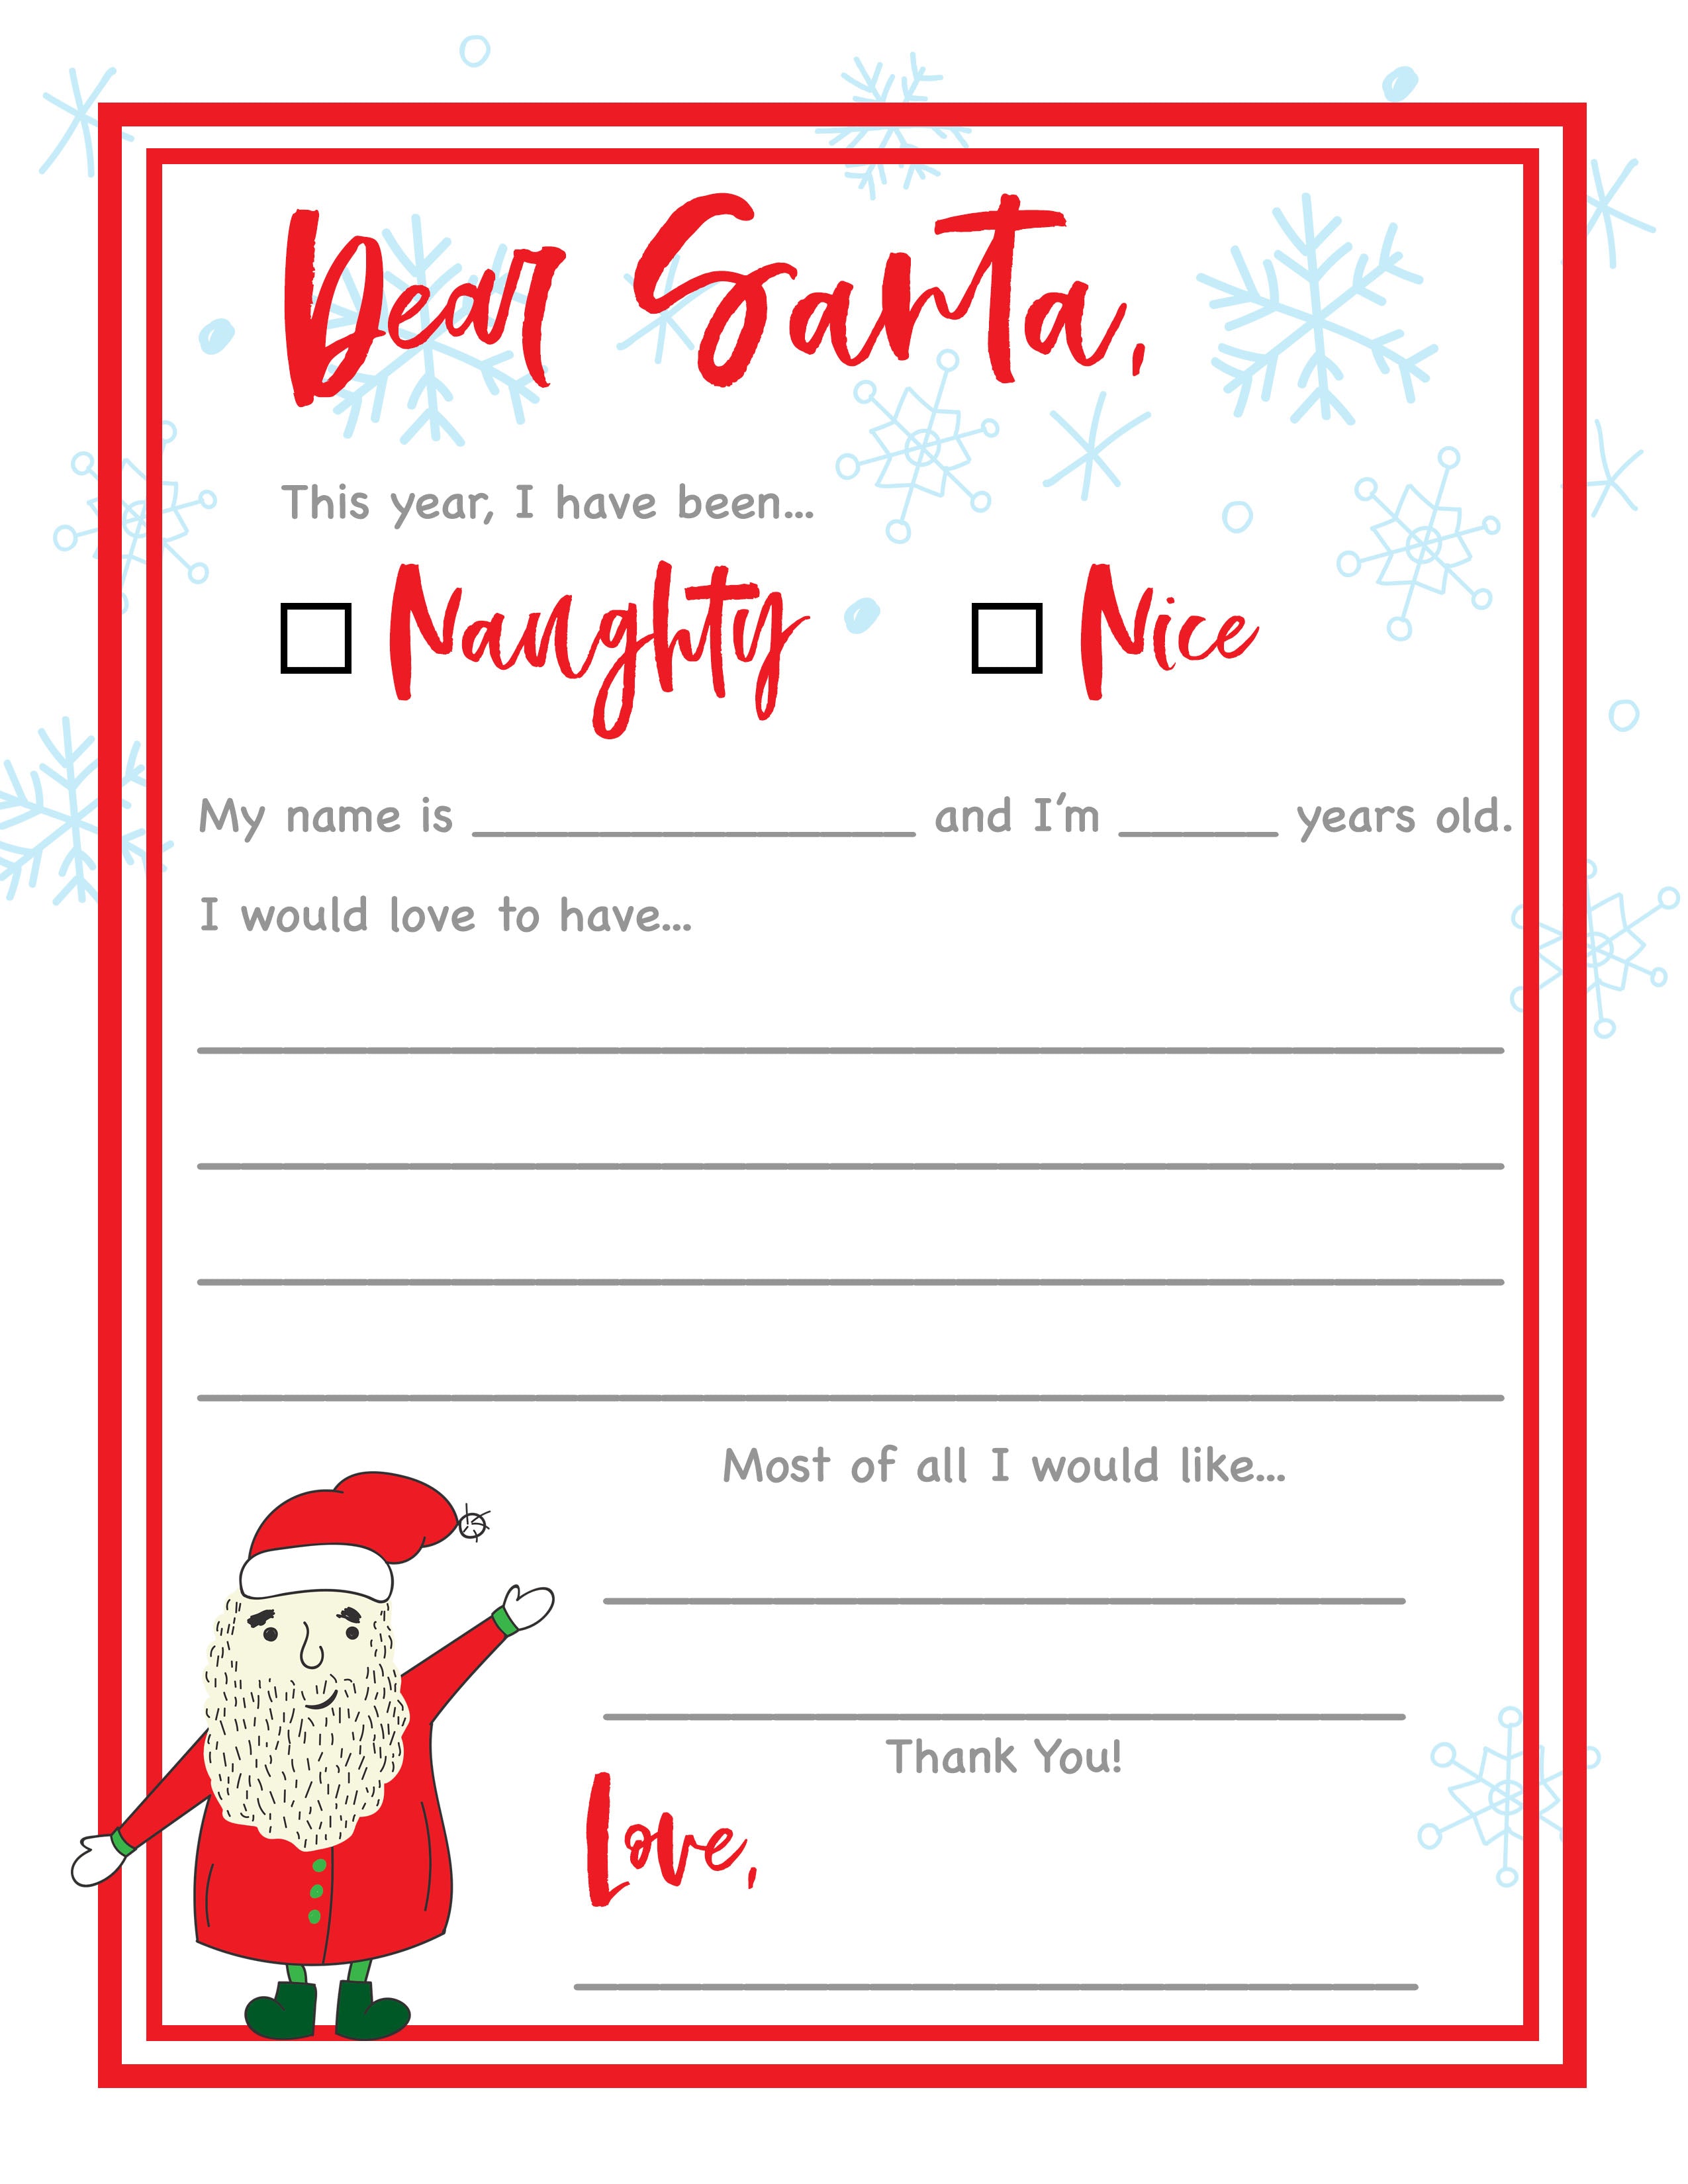 paper-holiday-list-letter-to-santa-printable-naughty-or-nice-dear-santa-letter-christmas-wish